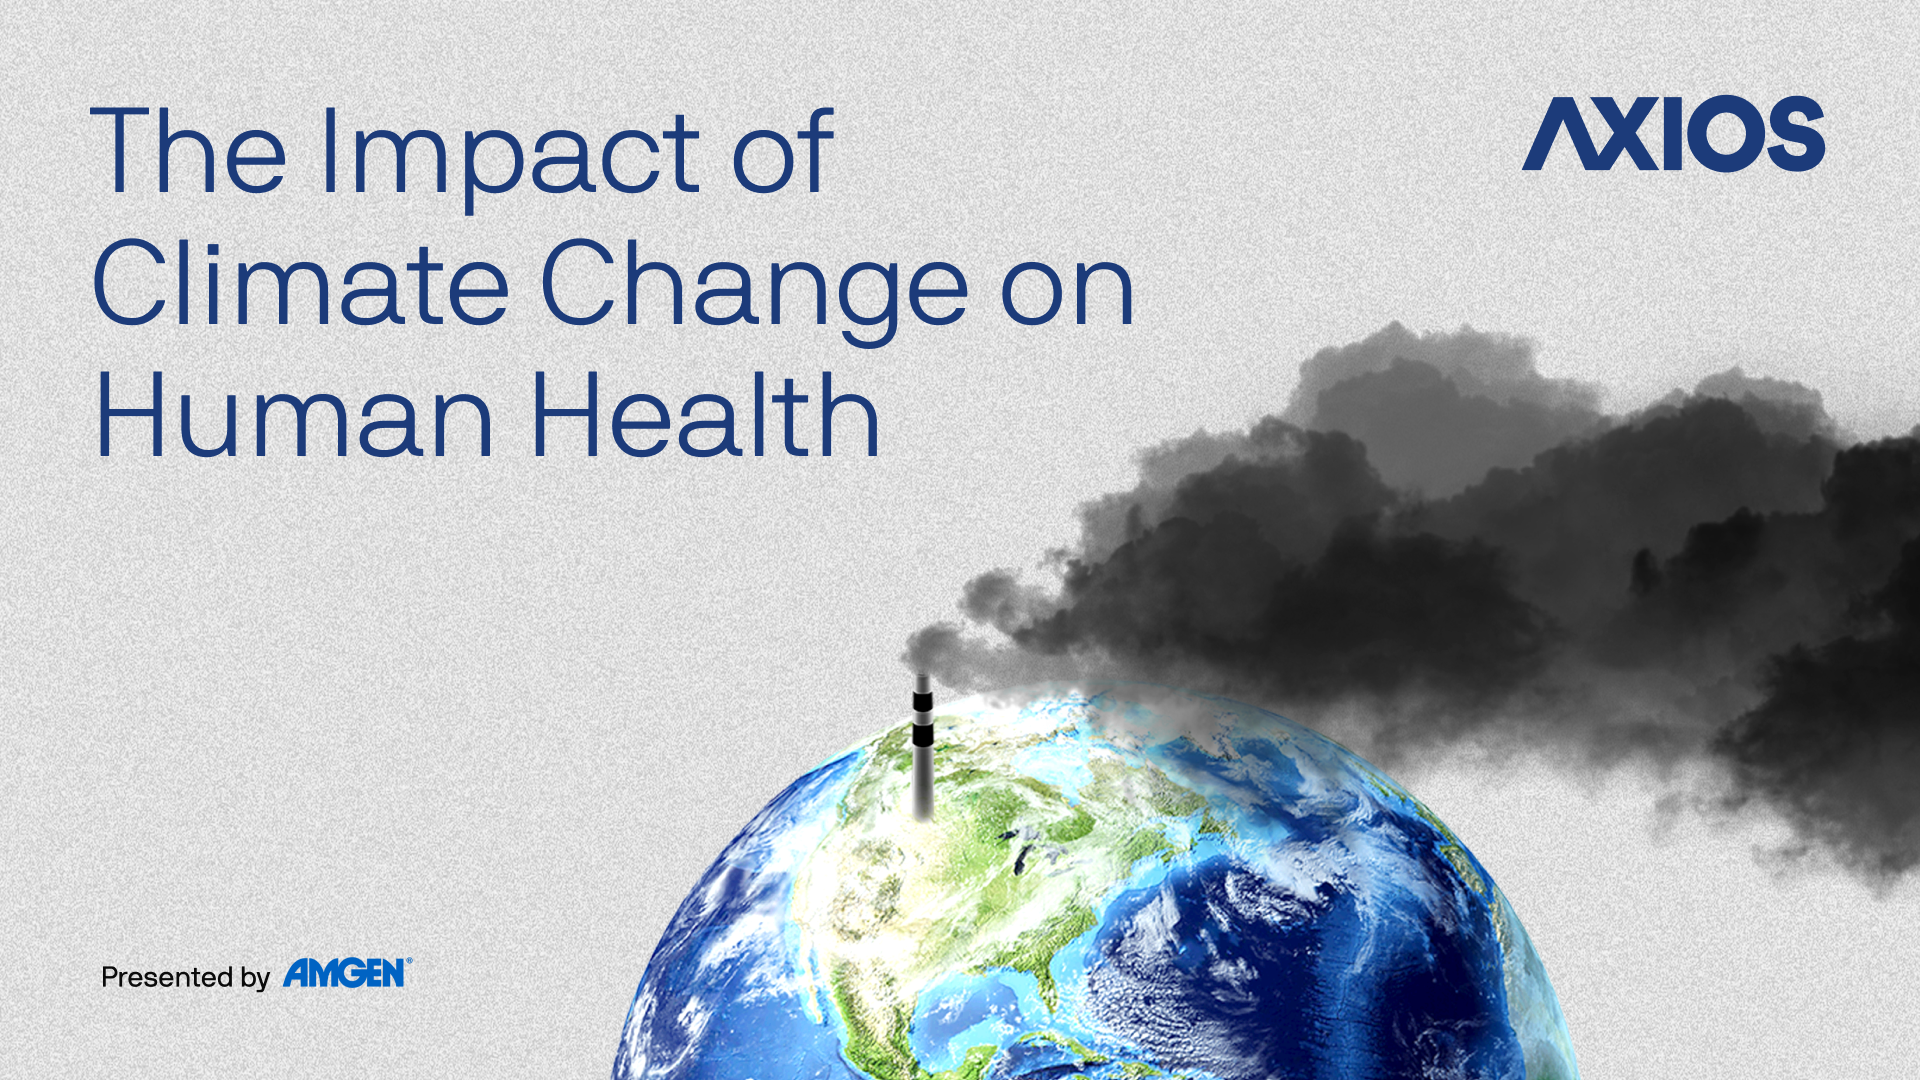 Axios' The Impact of Climate Change on Human Health Expert Voices Roundtable Discussion